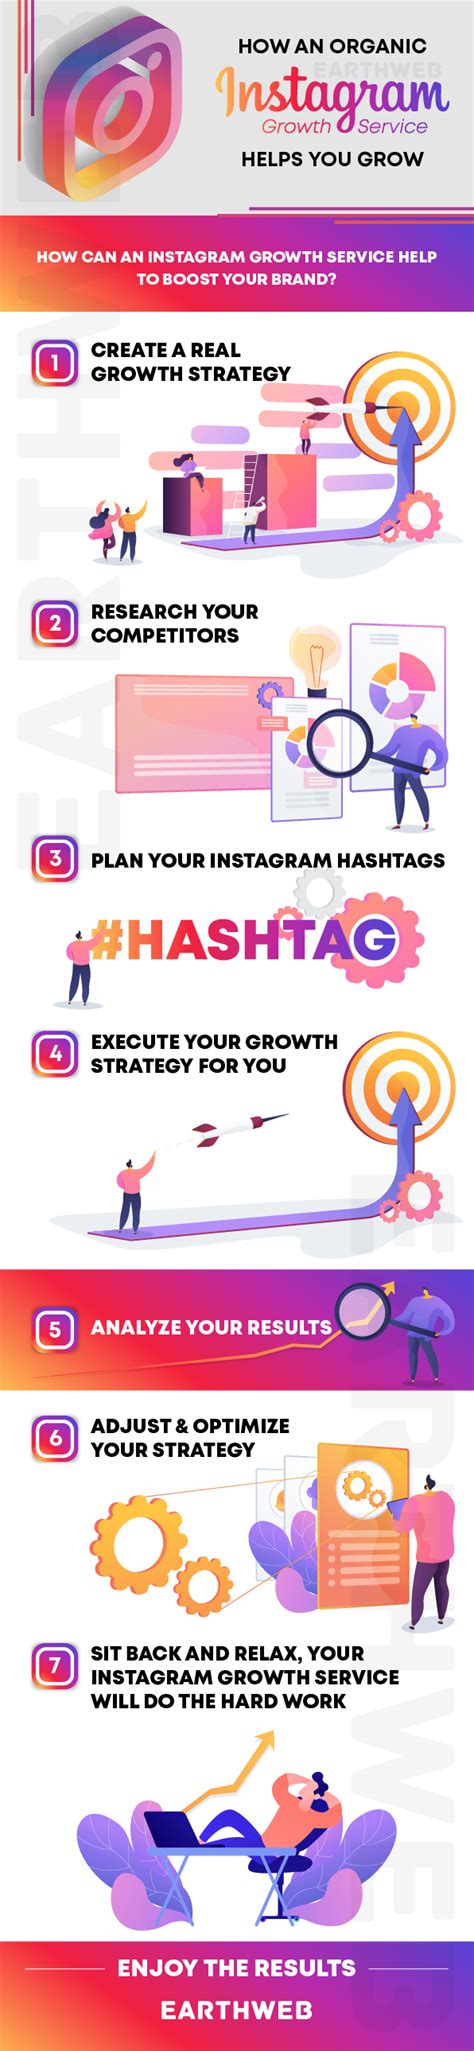 7 Ways On How To Grow Your Brand With An Organic Instagram Growth